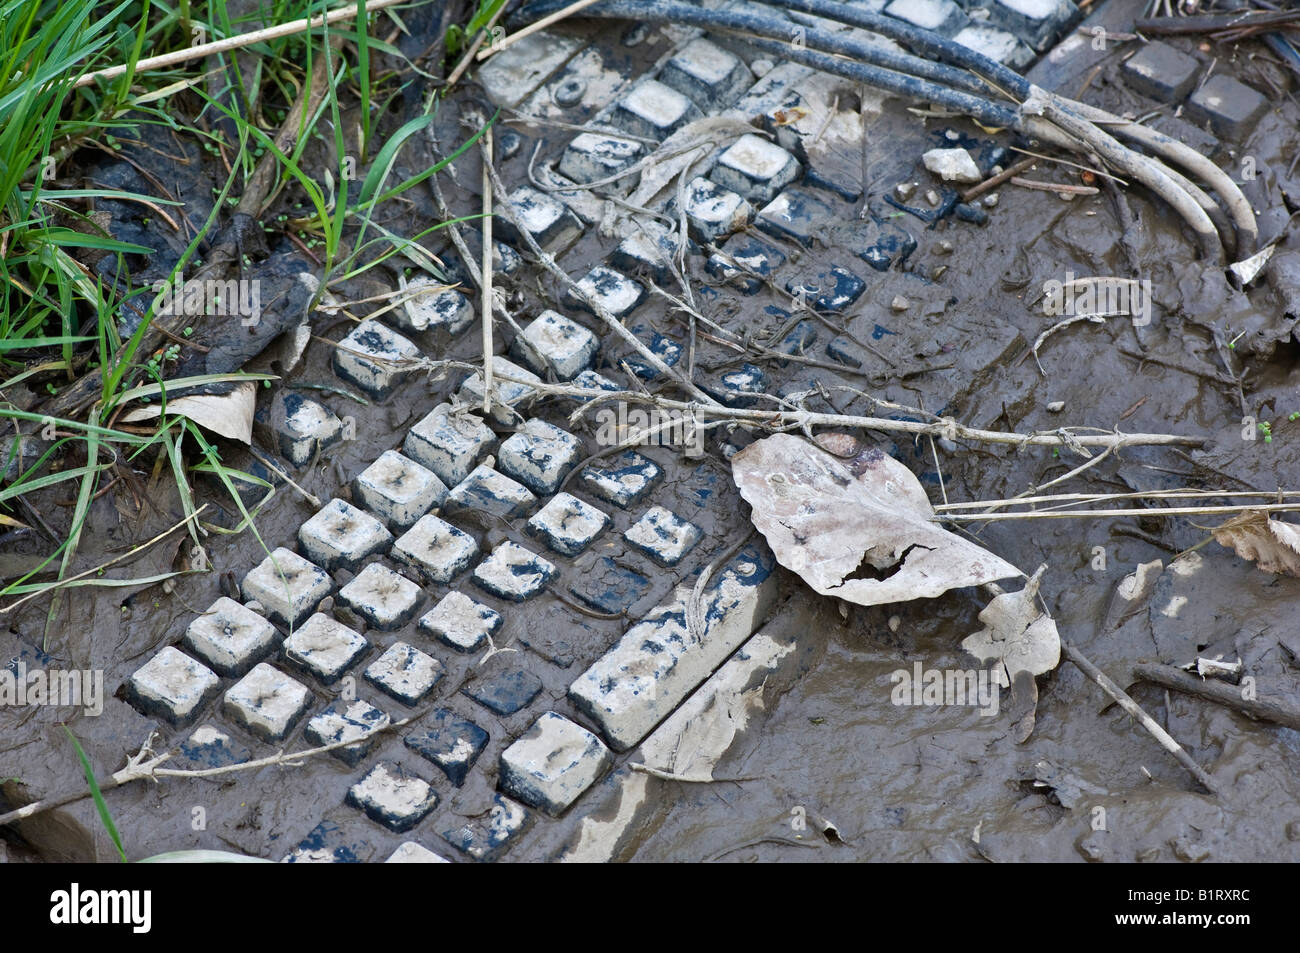 Computer keyboard covered in mud Stock Photo